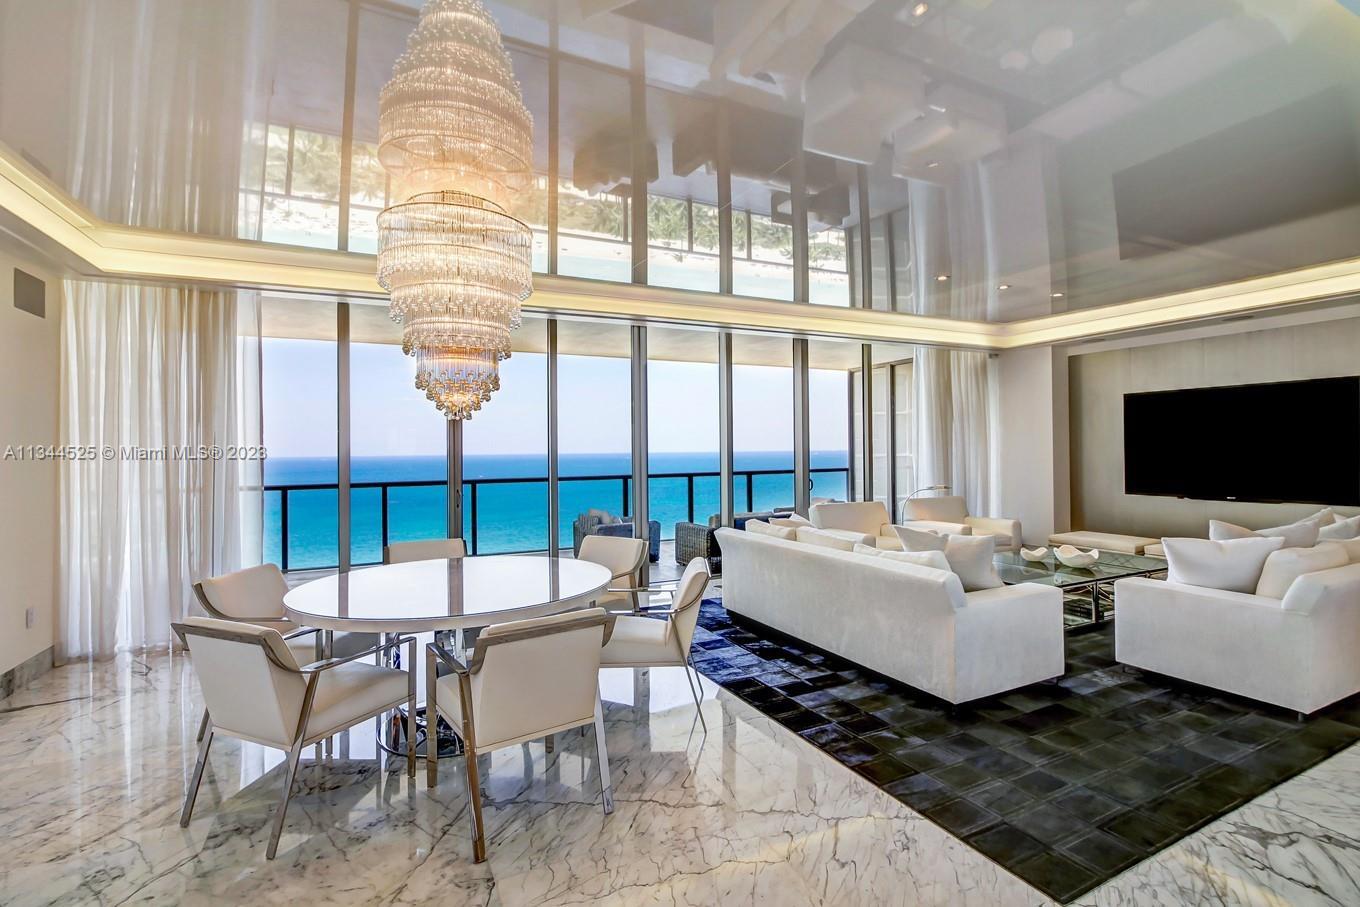 One-of-a-kind residence at Bal Harbour's most highly sought-after property, St Regis. A rare and tru